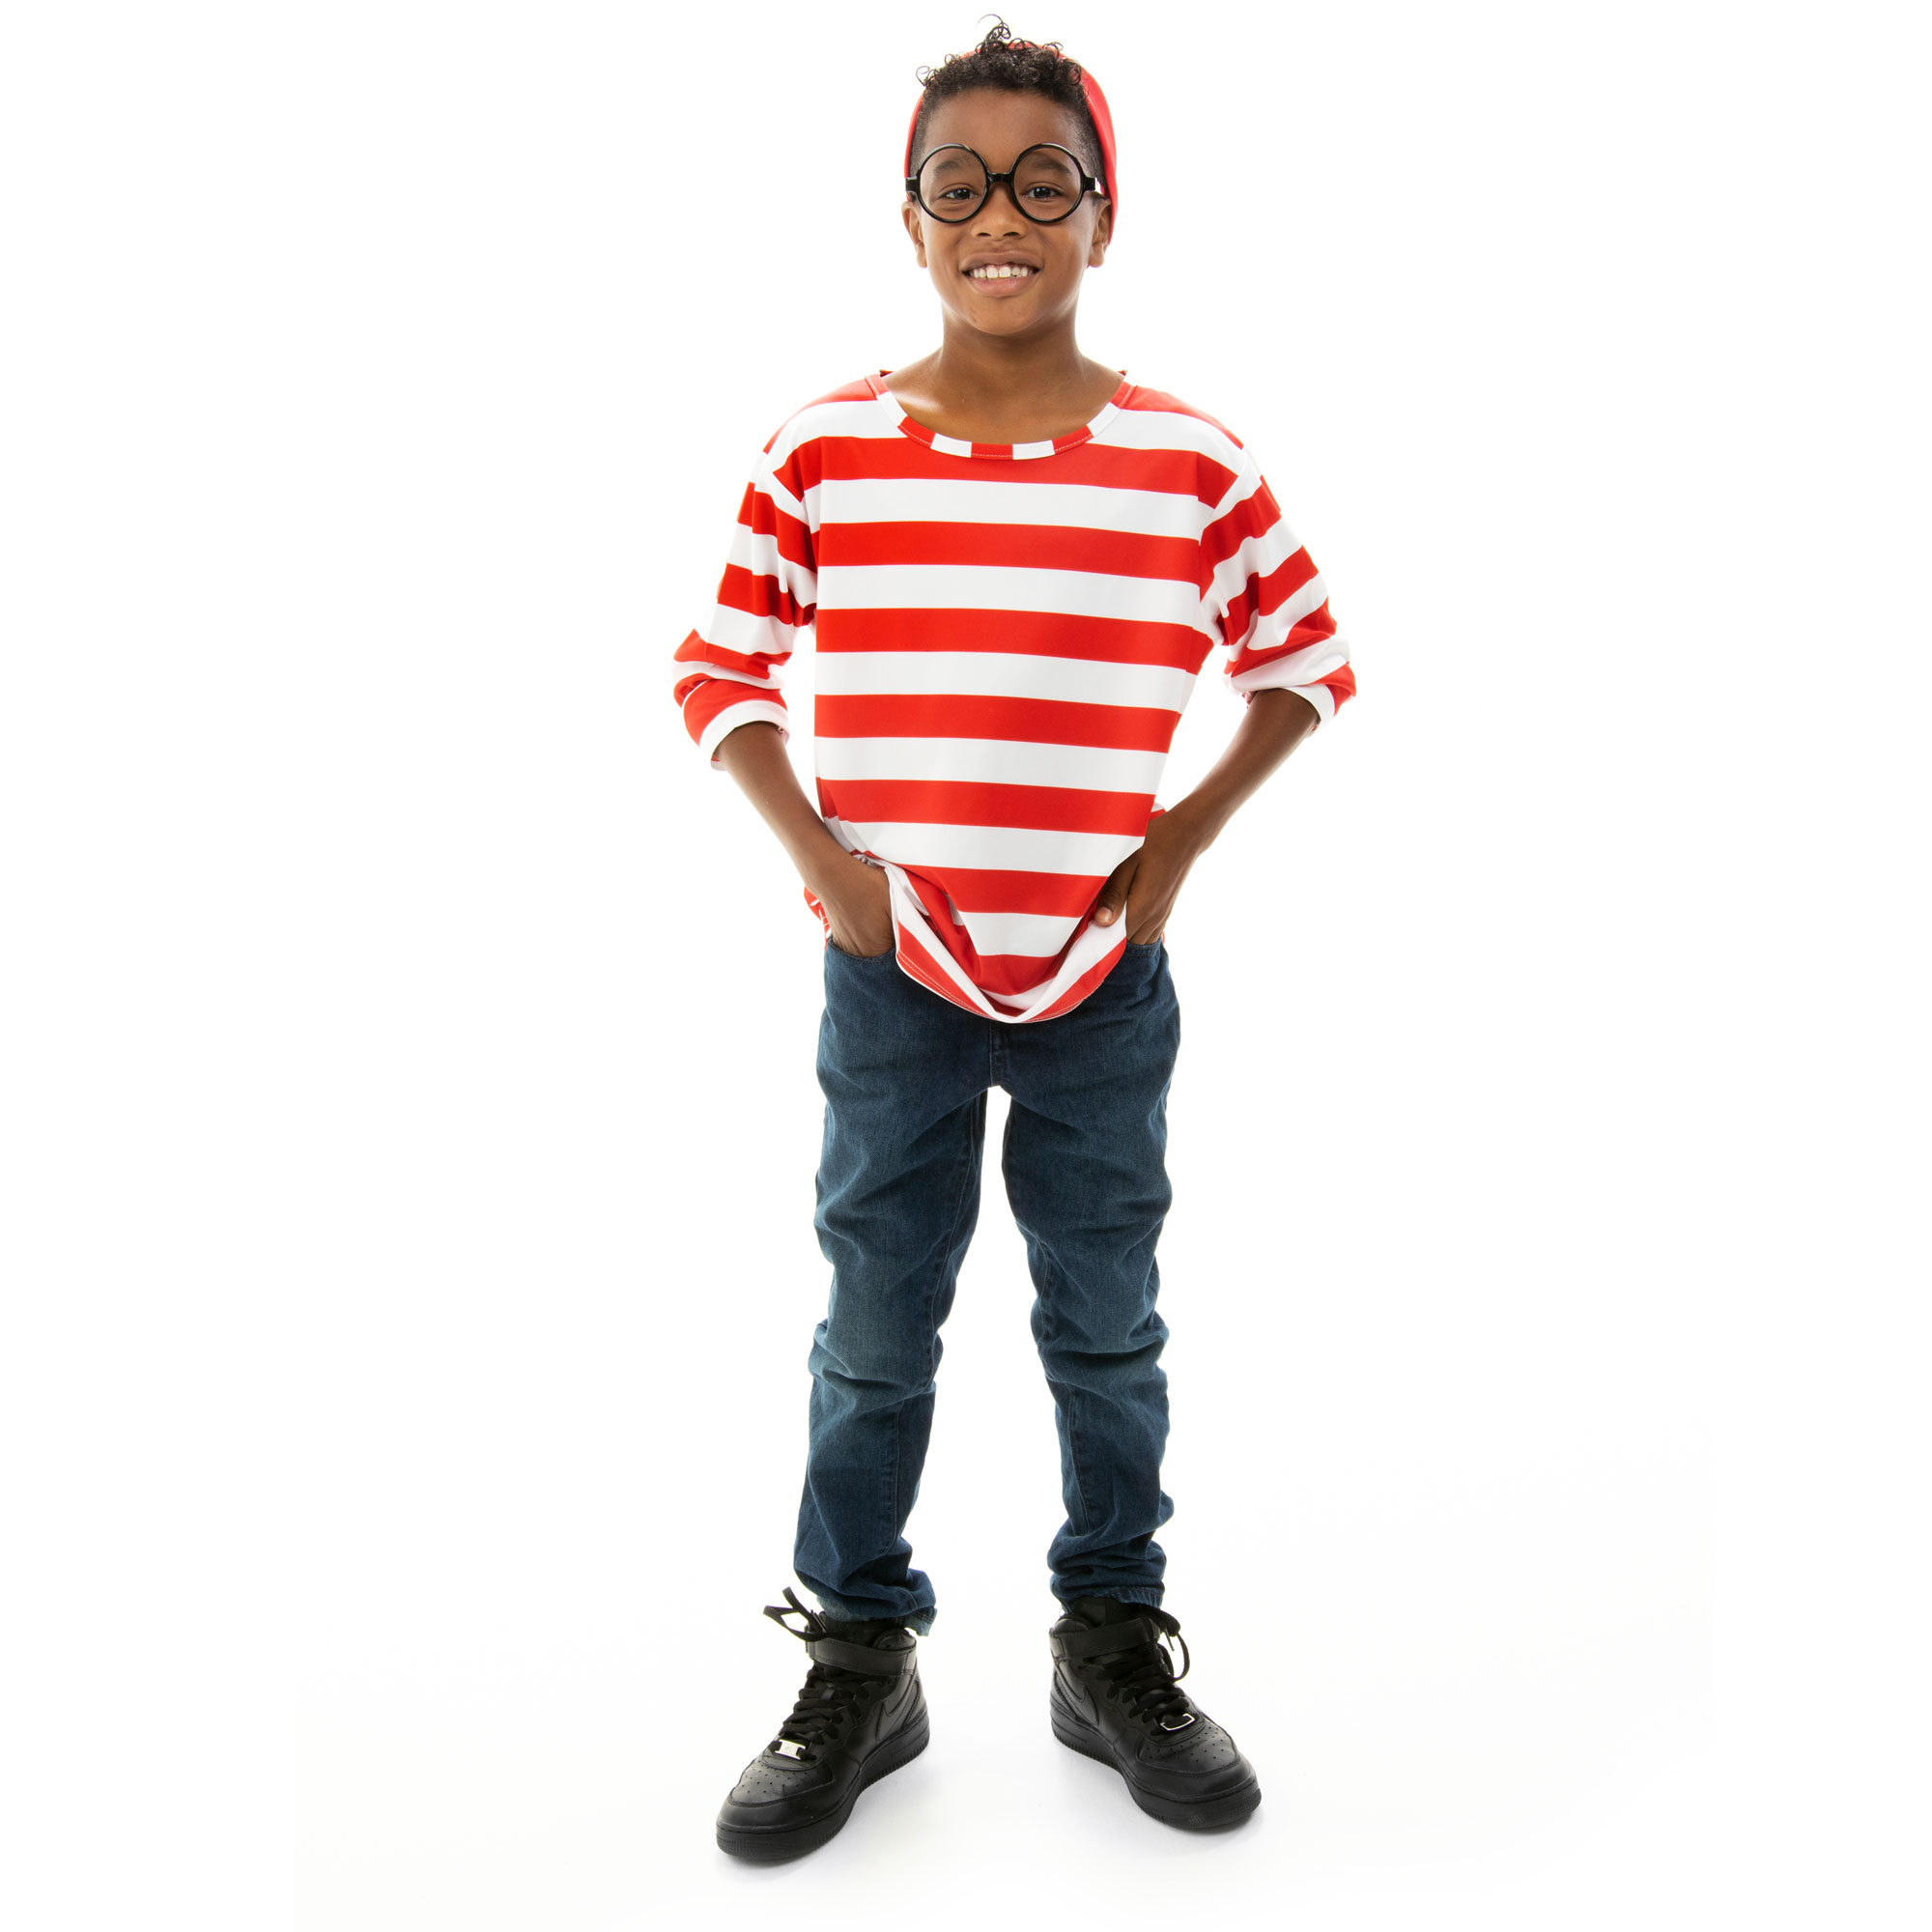 Where's Wally Halloween Costume - Child's Cosplay Outfit, L